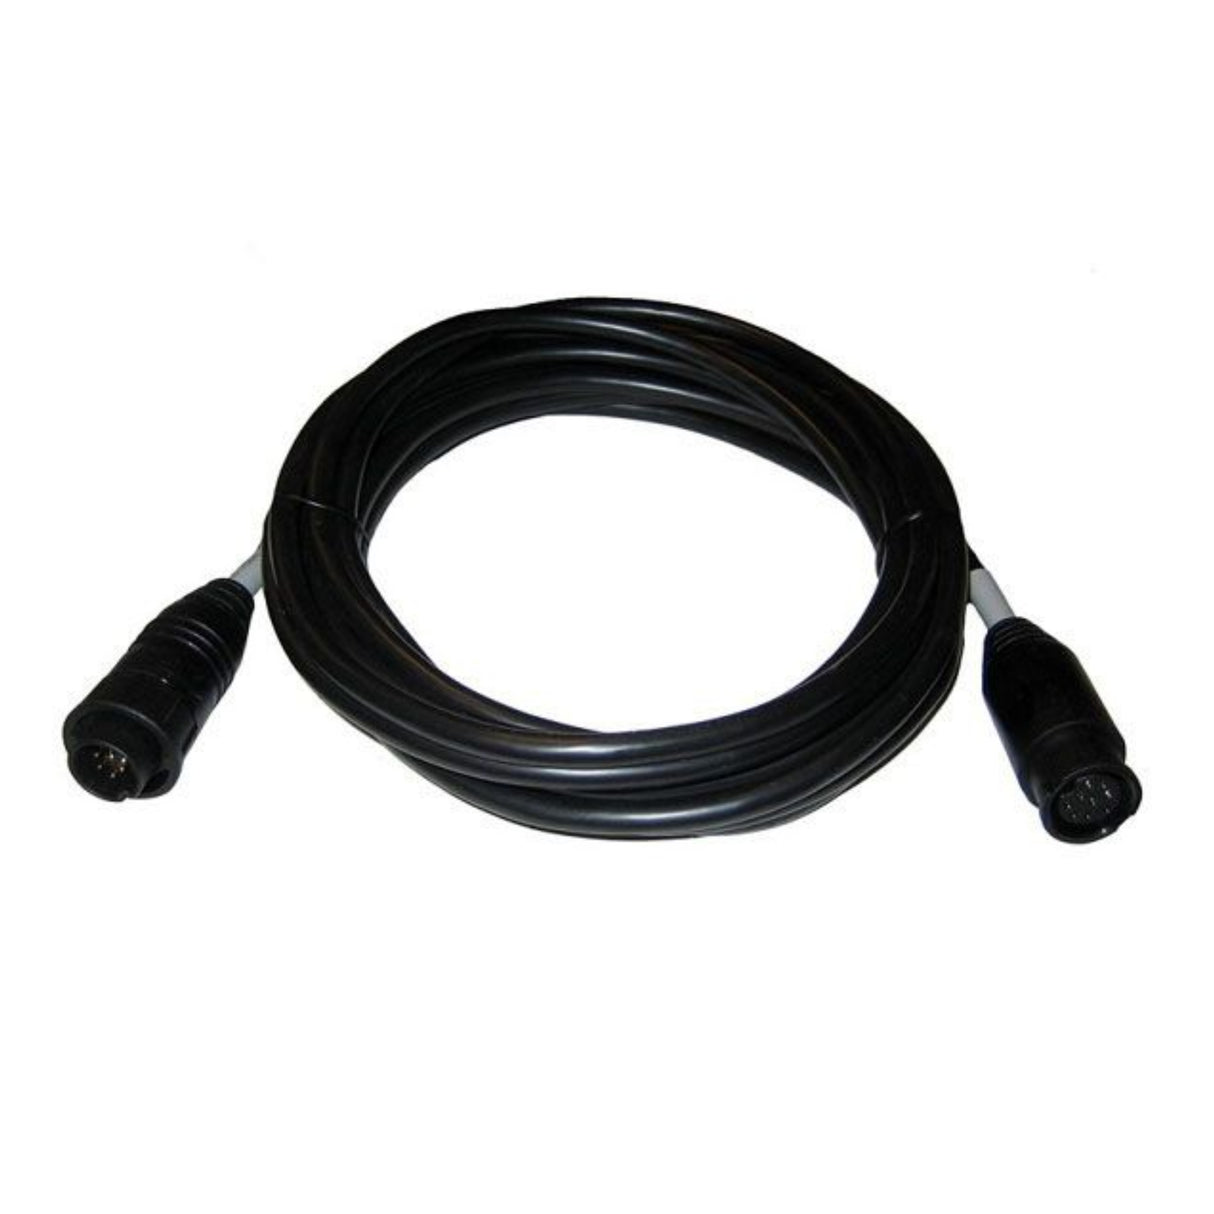 Raymarine CP470/570 CHIRP Tranducer Extension Cable - PROTEUS MARINE STORE